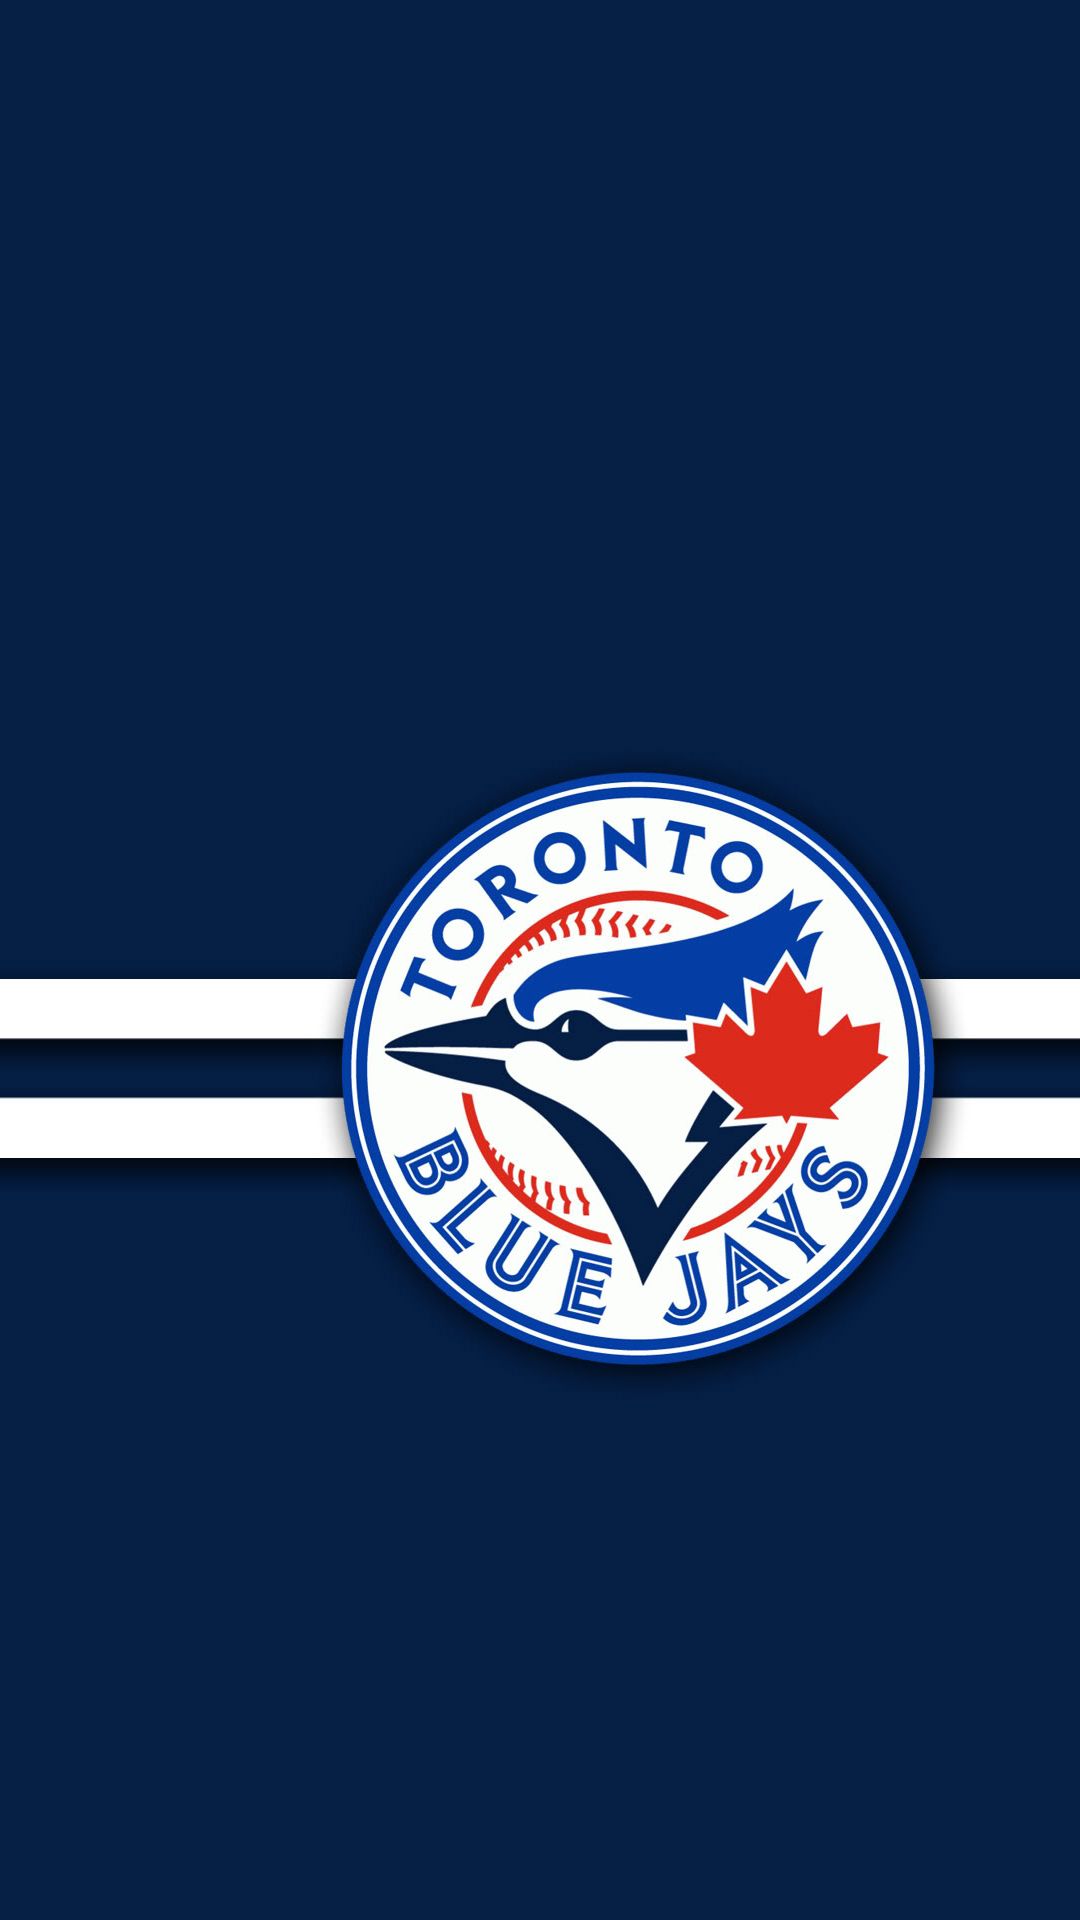 Blue Jay Wallpapers